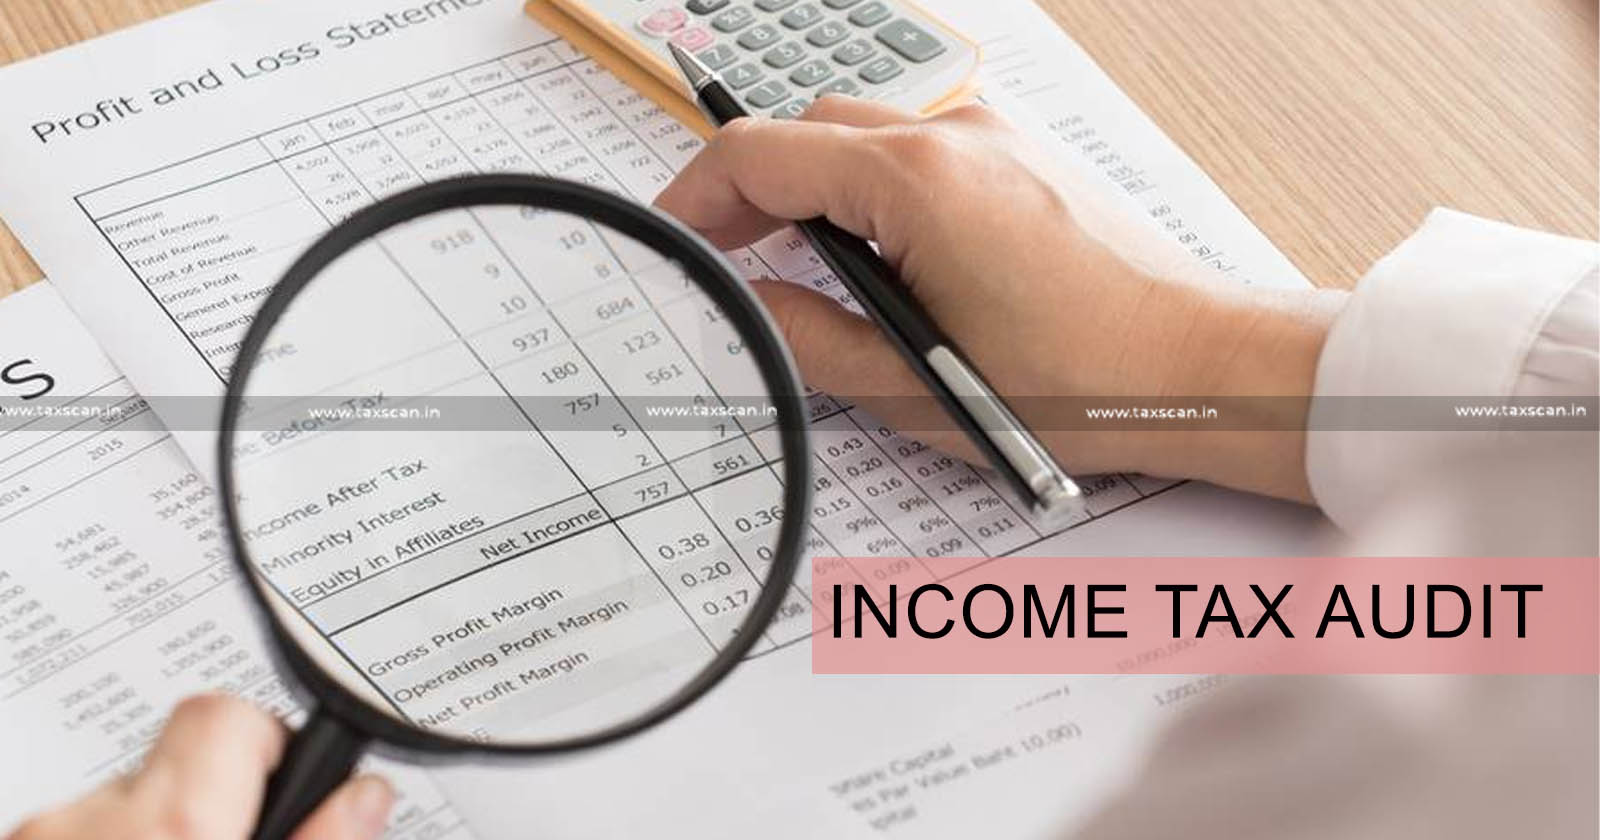 Income Tax Audit Due Date - Tax Audit - Penalty - TAXSCAN